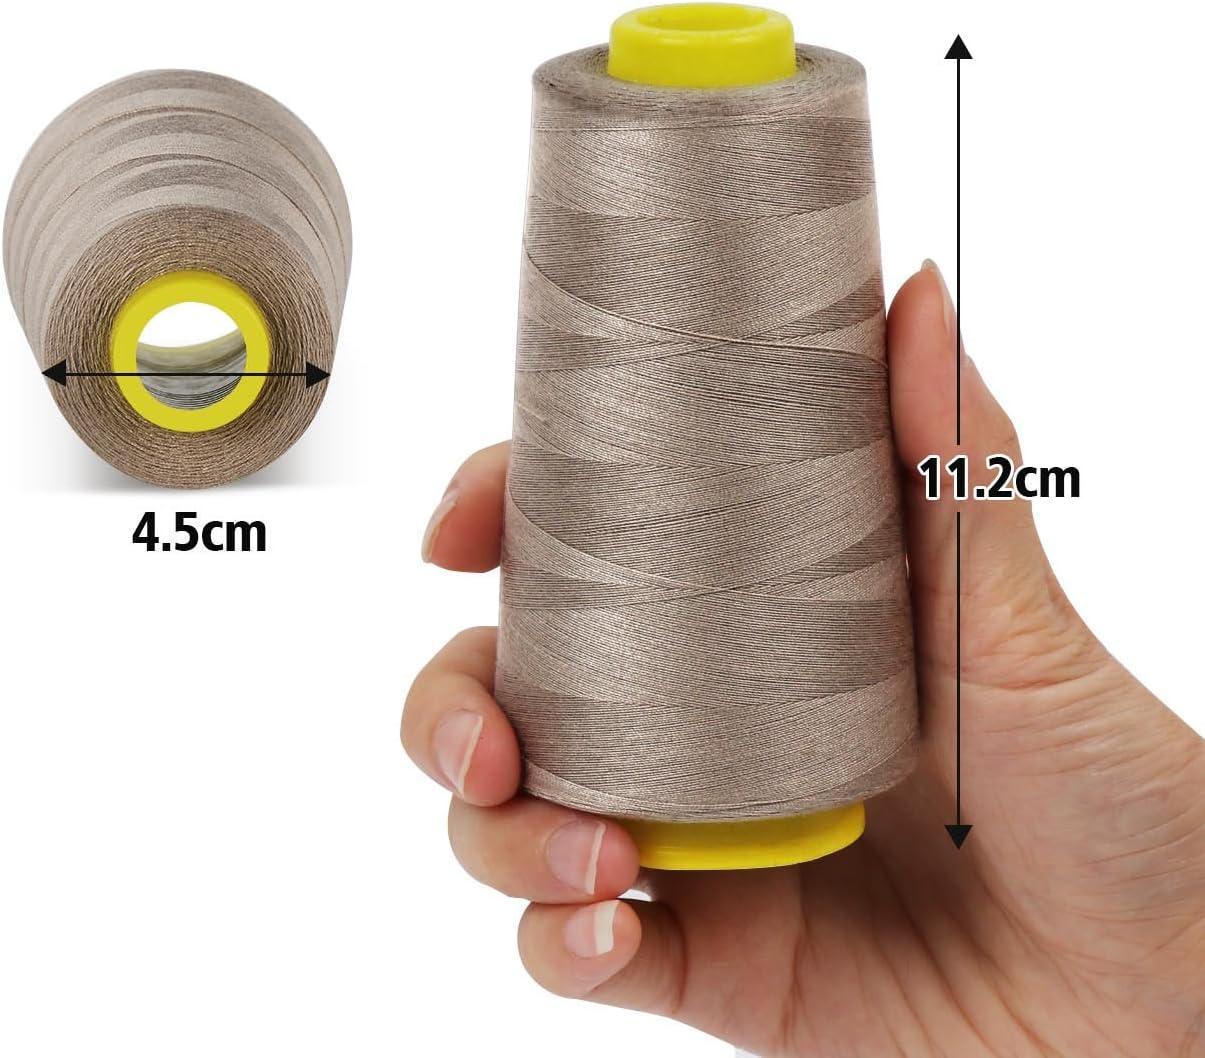 Polyester Sewing Thread 3000 Yards High Strength Spools of Thread  Embroidery Sewing Thread Spools for Upholstery Quilting Beading Needlework  Orange